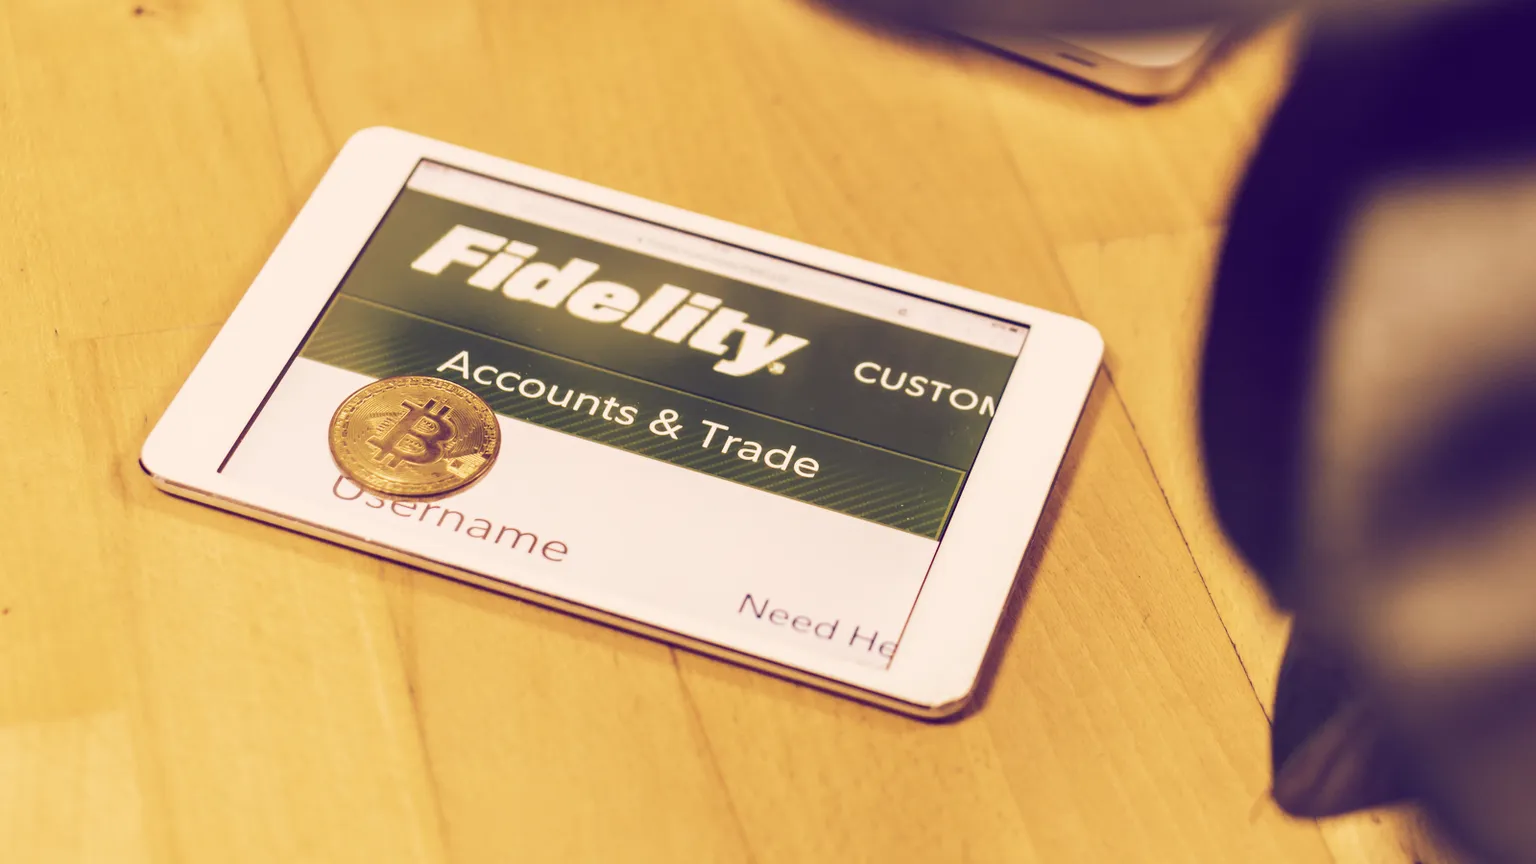 Fidelity and Bitcoin. Image: Shutterstock